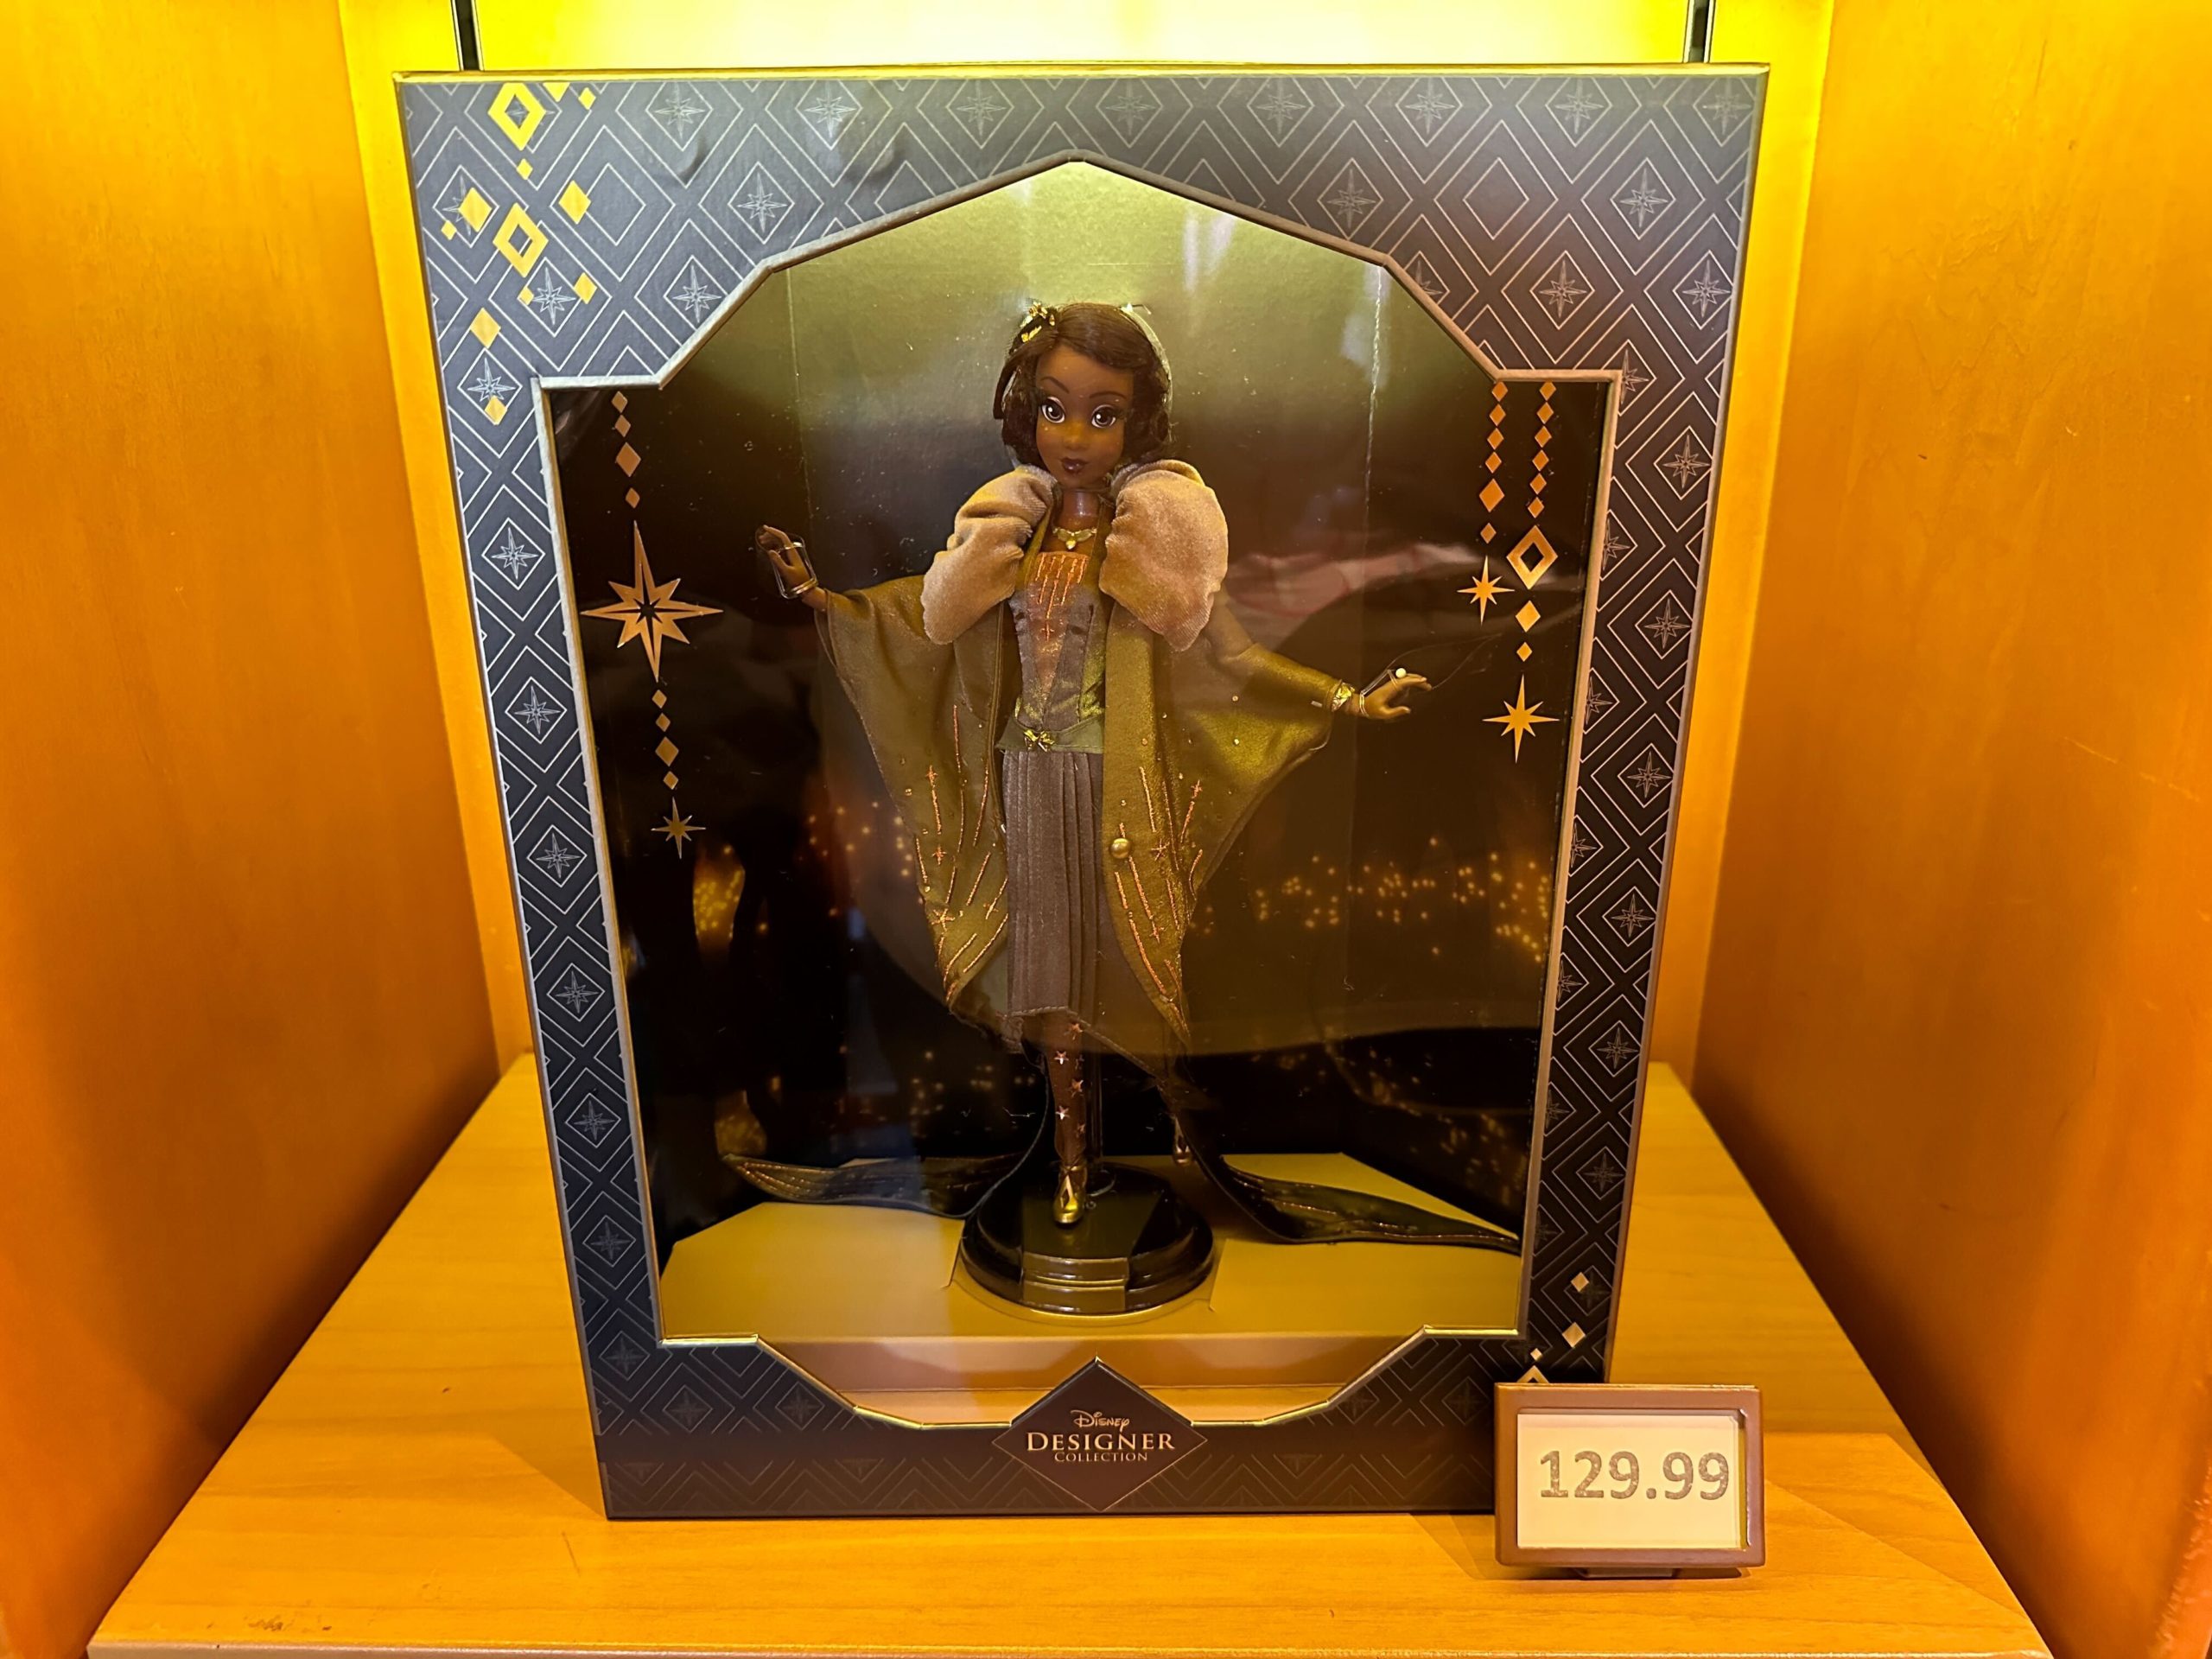 https://mickeyblog.com/wp-content/uploads/2023/06/Tiana-Collectors-Doll-2-scaled.jpg